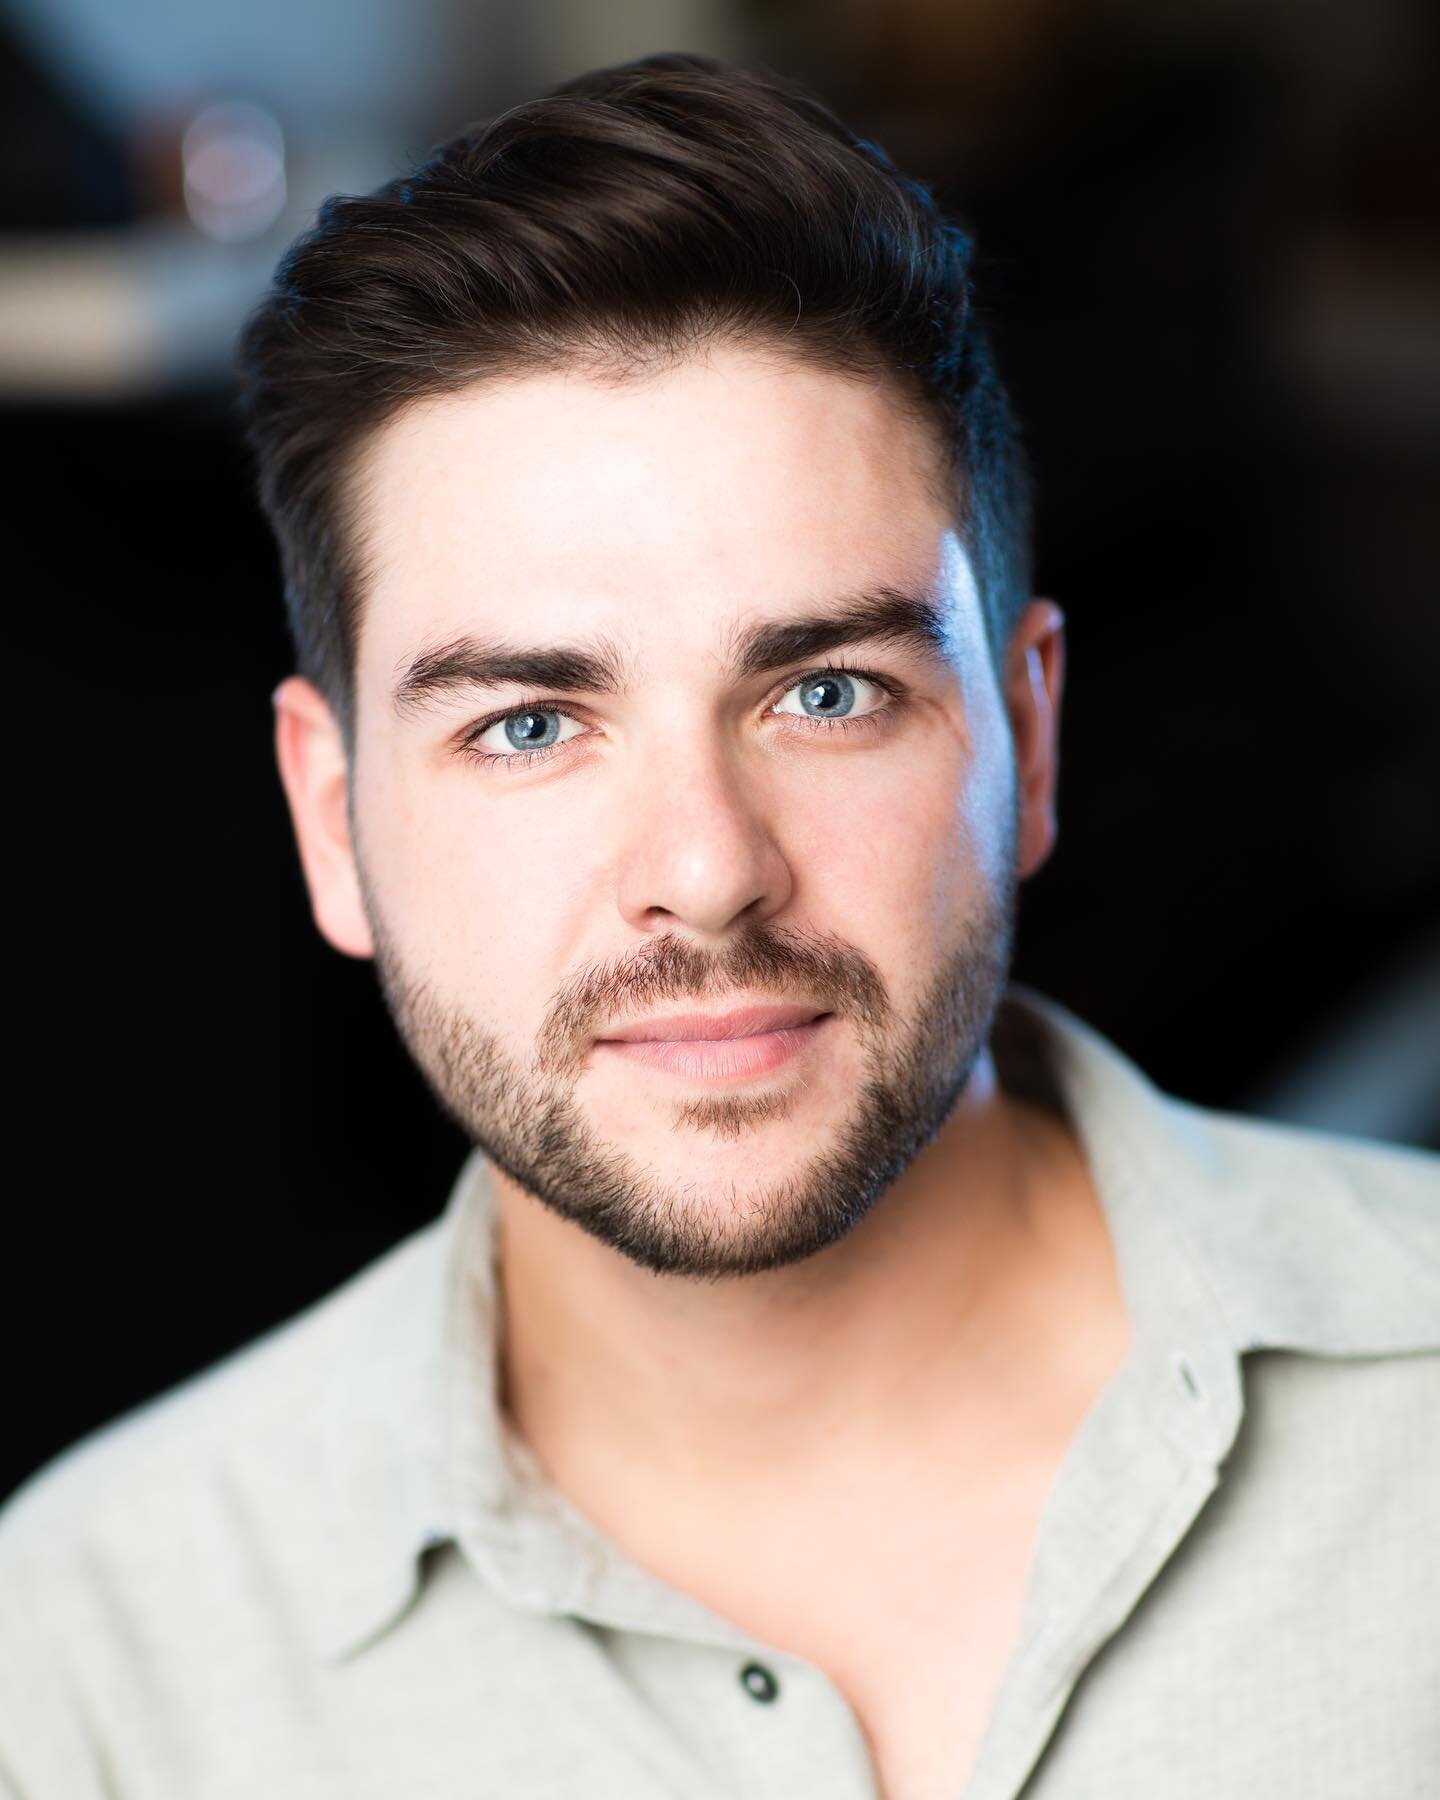 Introducing the incredible, Nick Pinchbeck (he/him)!

Nick studied at the London College of Music and has since worked extensively within the industry as an MD &amp; multi-instrumentalist.&nbsp;
&nbsp;
His credits include; Eugenius (The Turbine, MD),